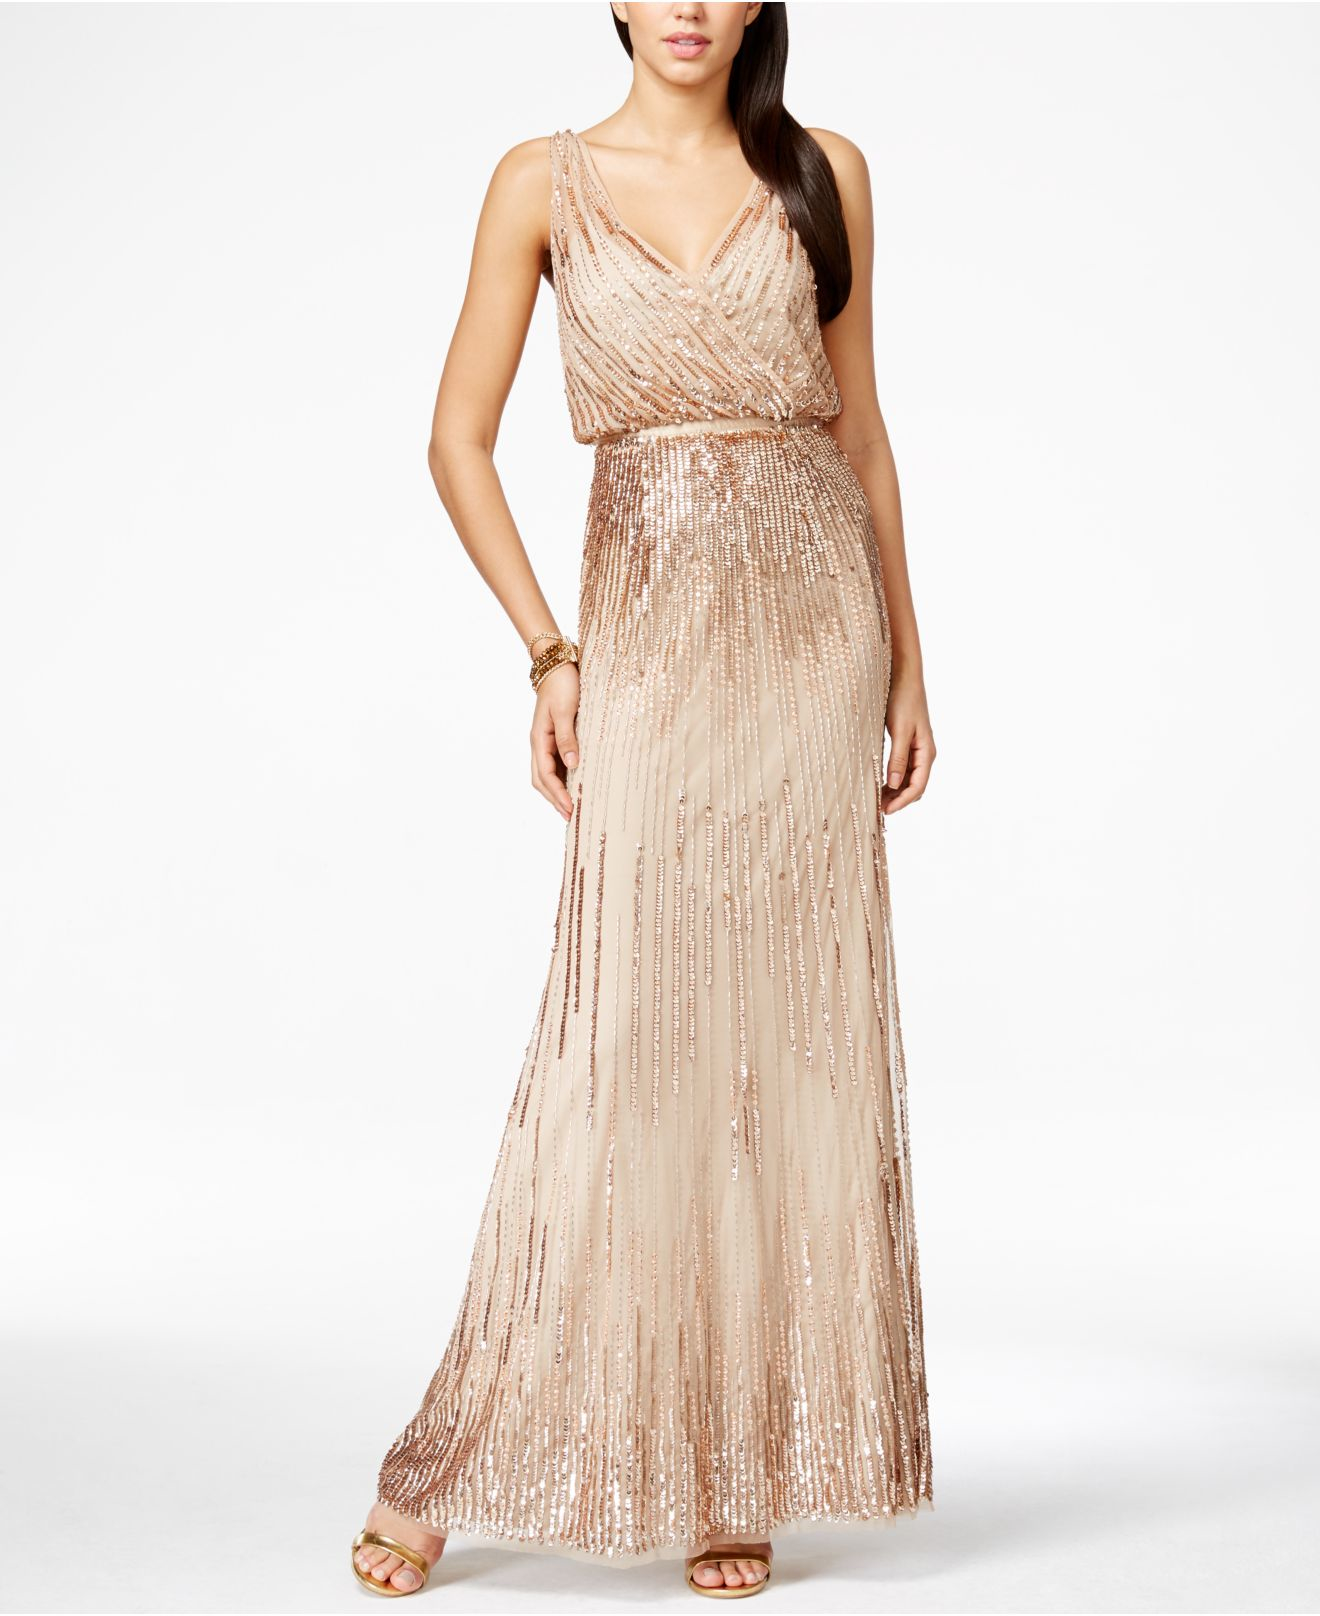 Lyst - Adrianna Papell Petite Beaded Faux-wrap Gown in Metallic